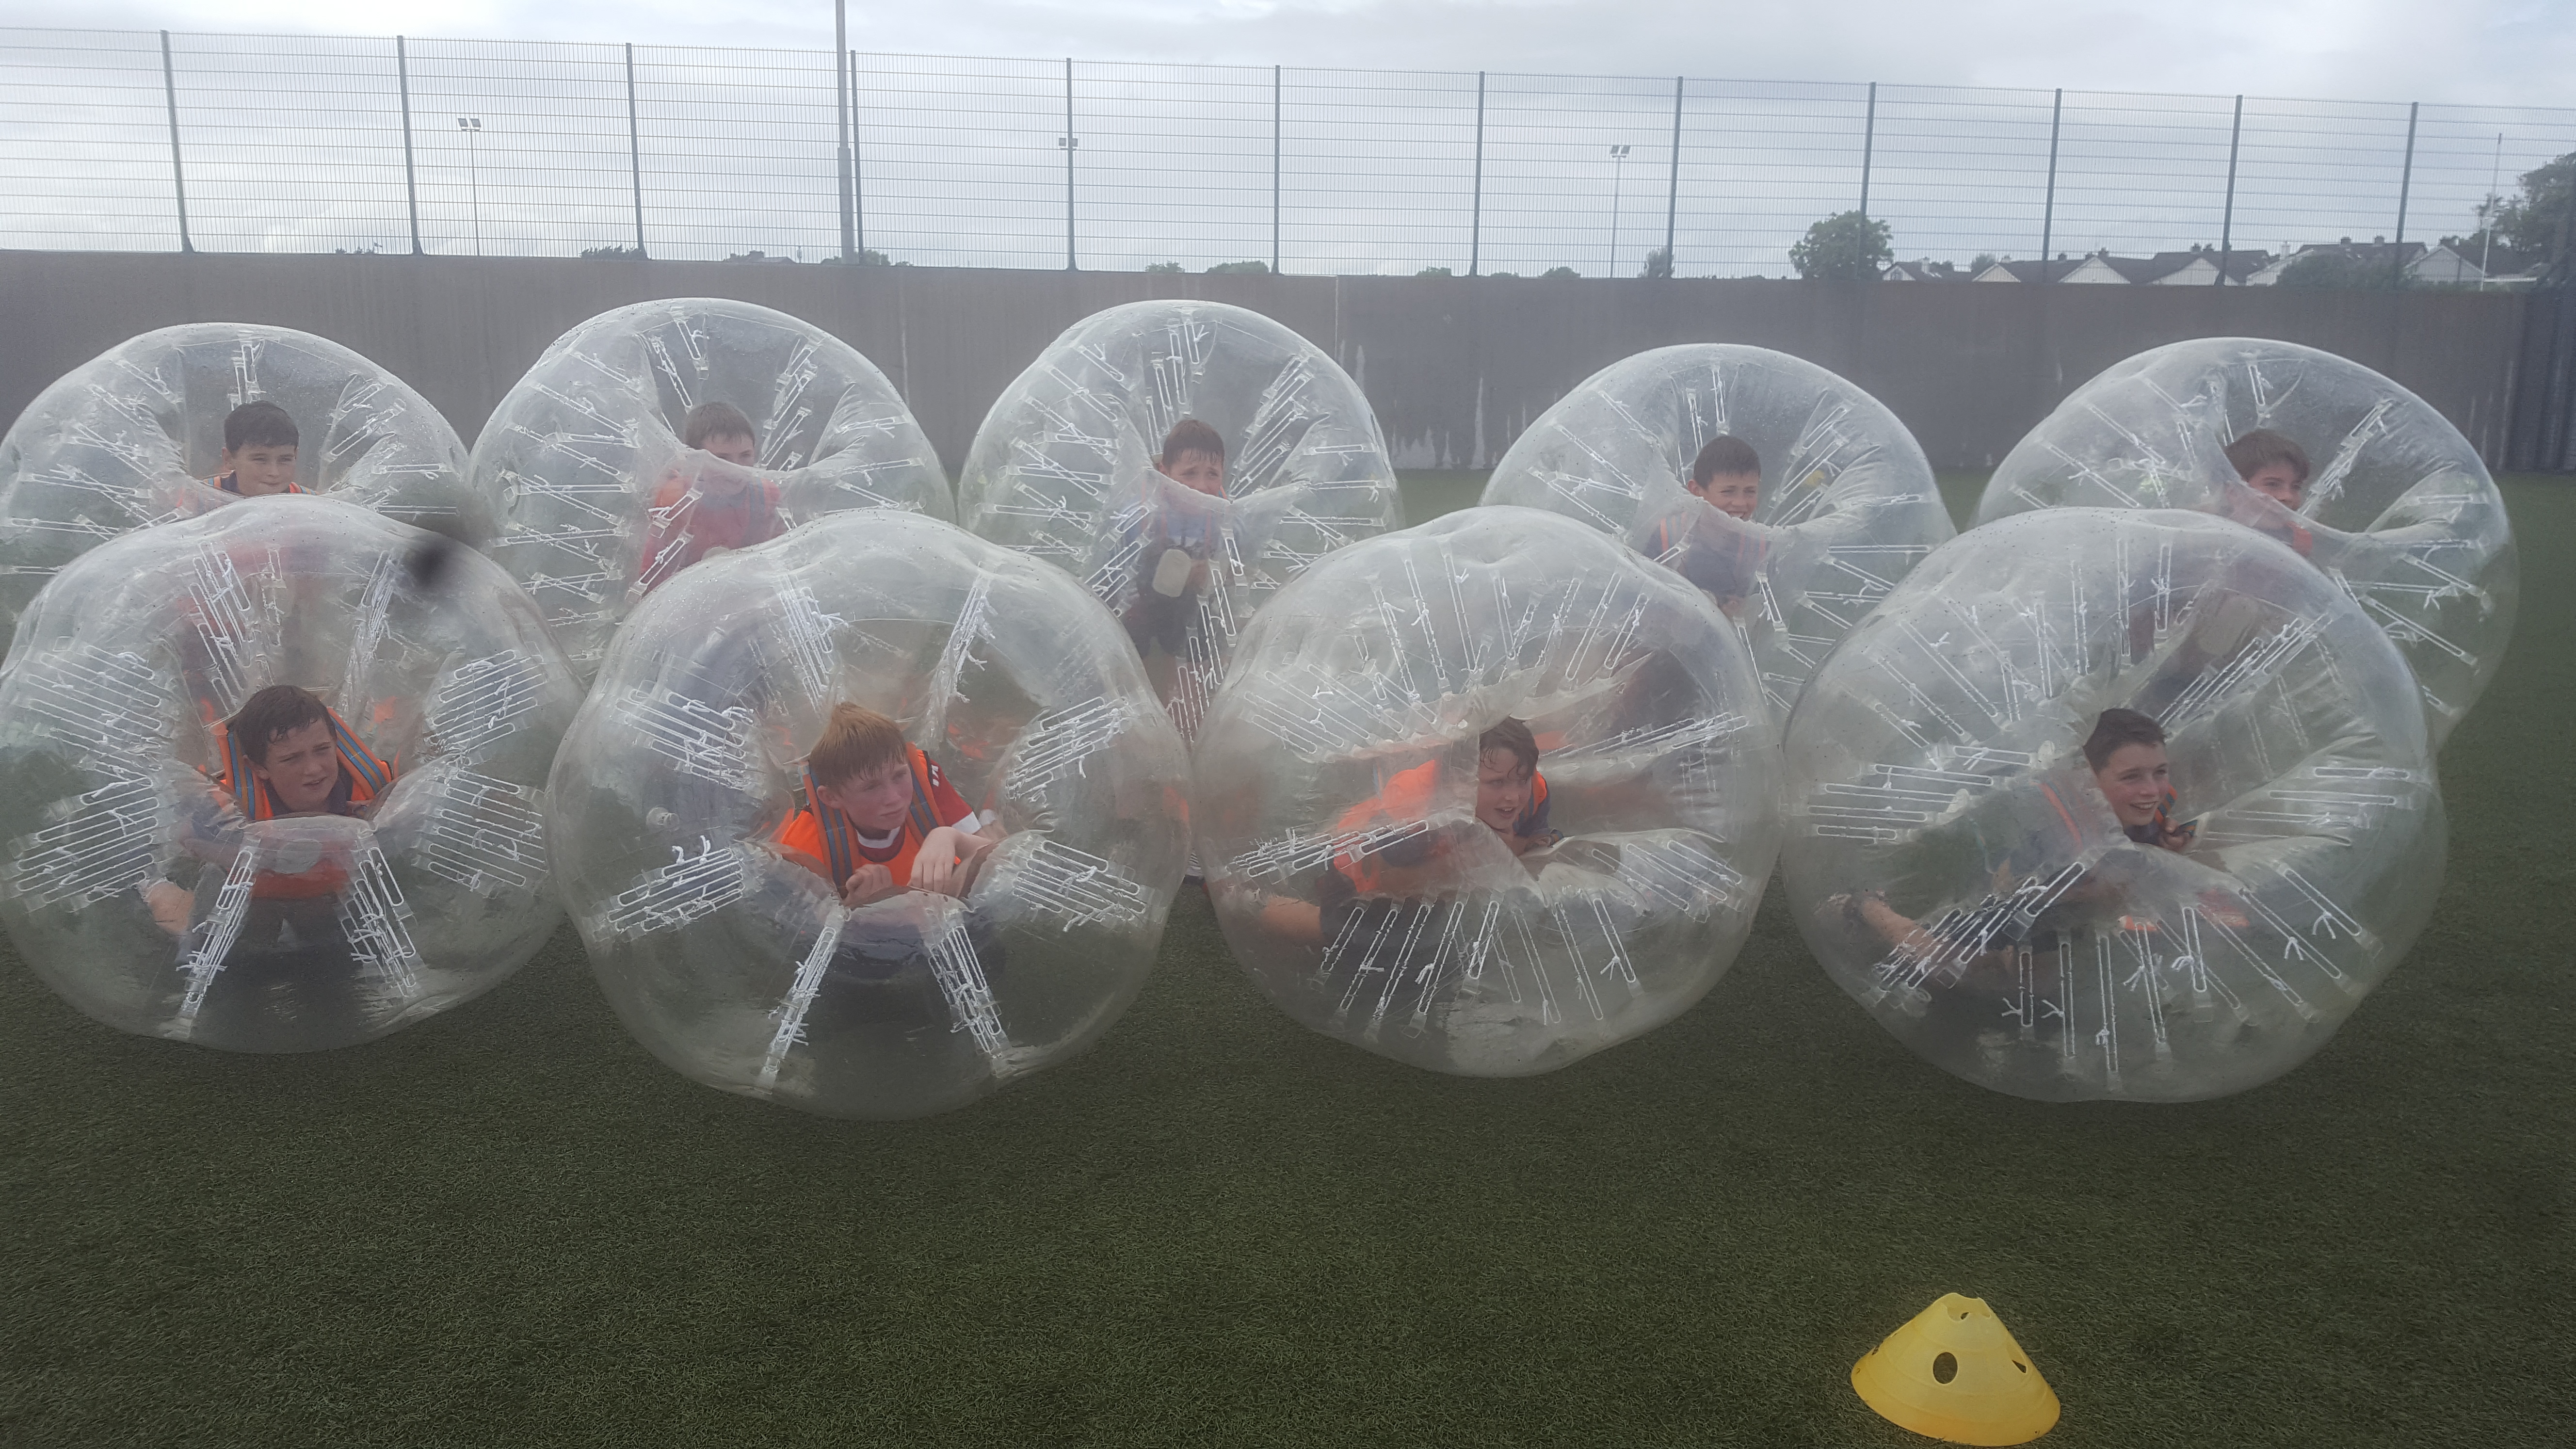 Group of kids in team photo within large Bubble Footballs